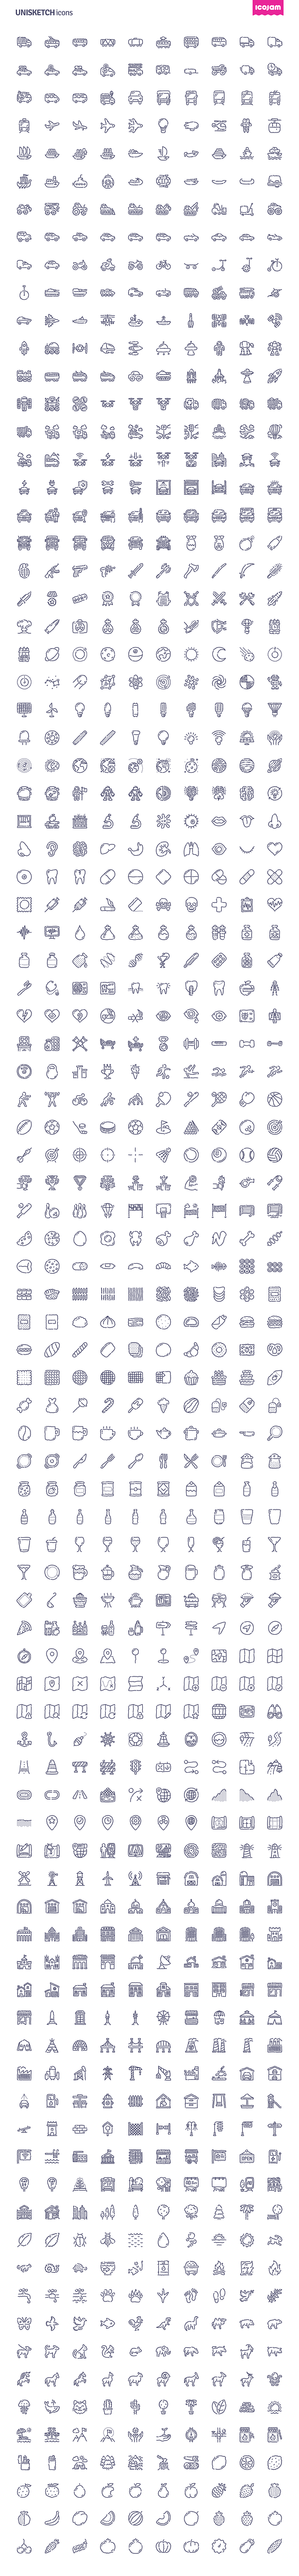 3000 Unisketch hand drawn icons in Birthday Icons - product preview 3